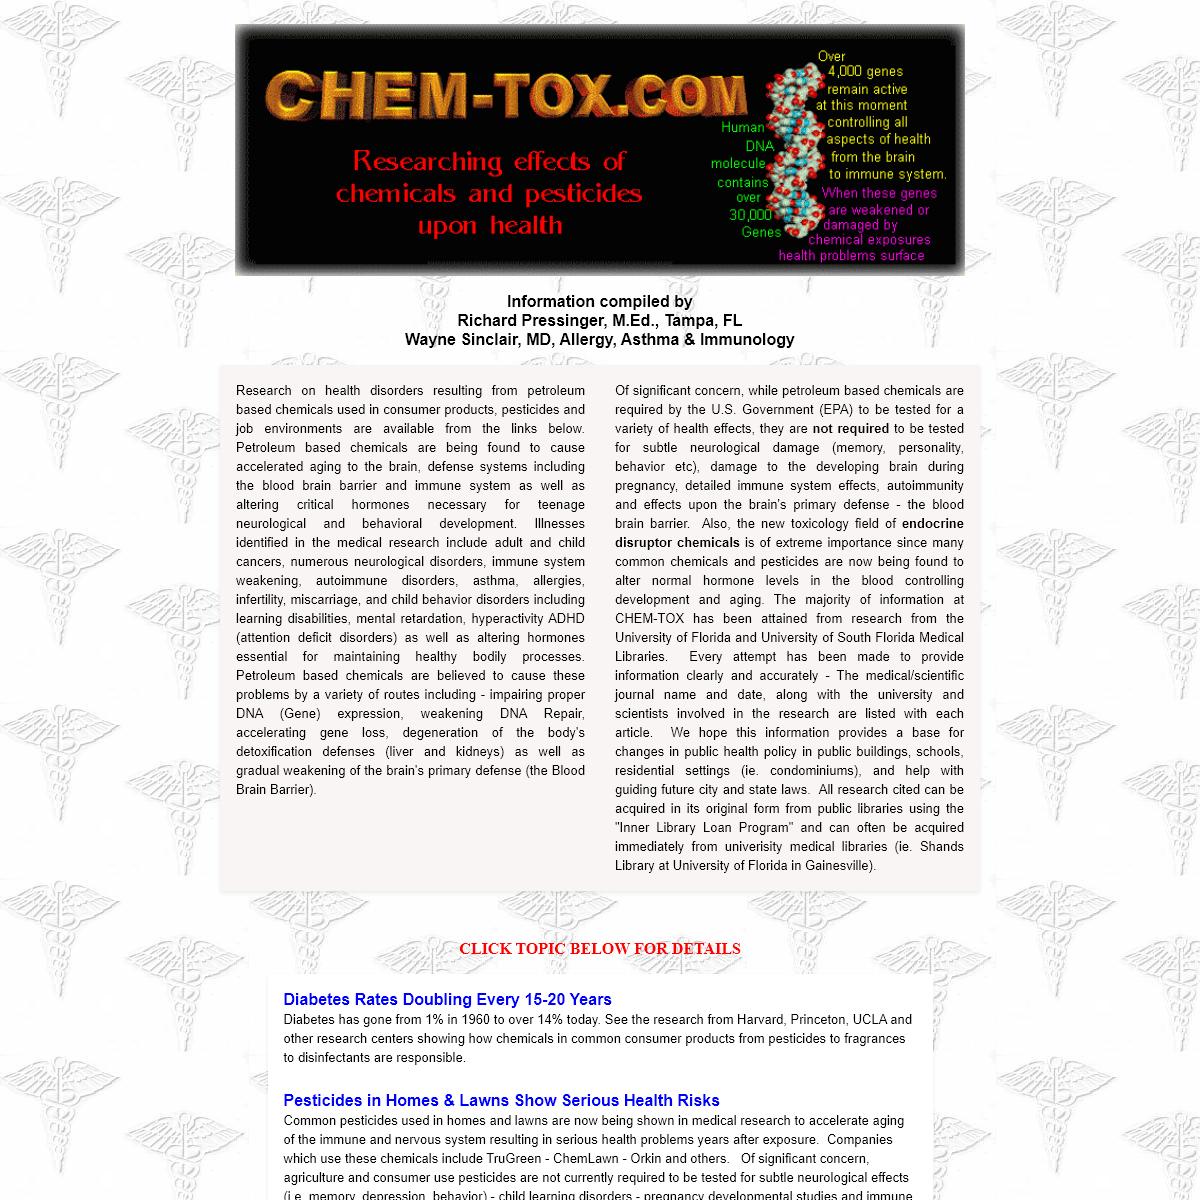 A complete backup of chem-tox.com